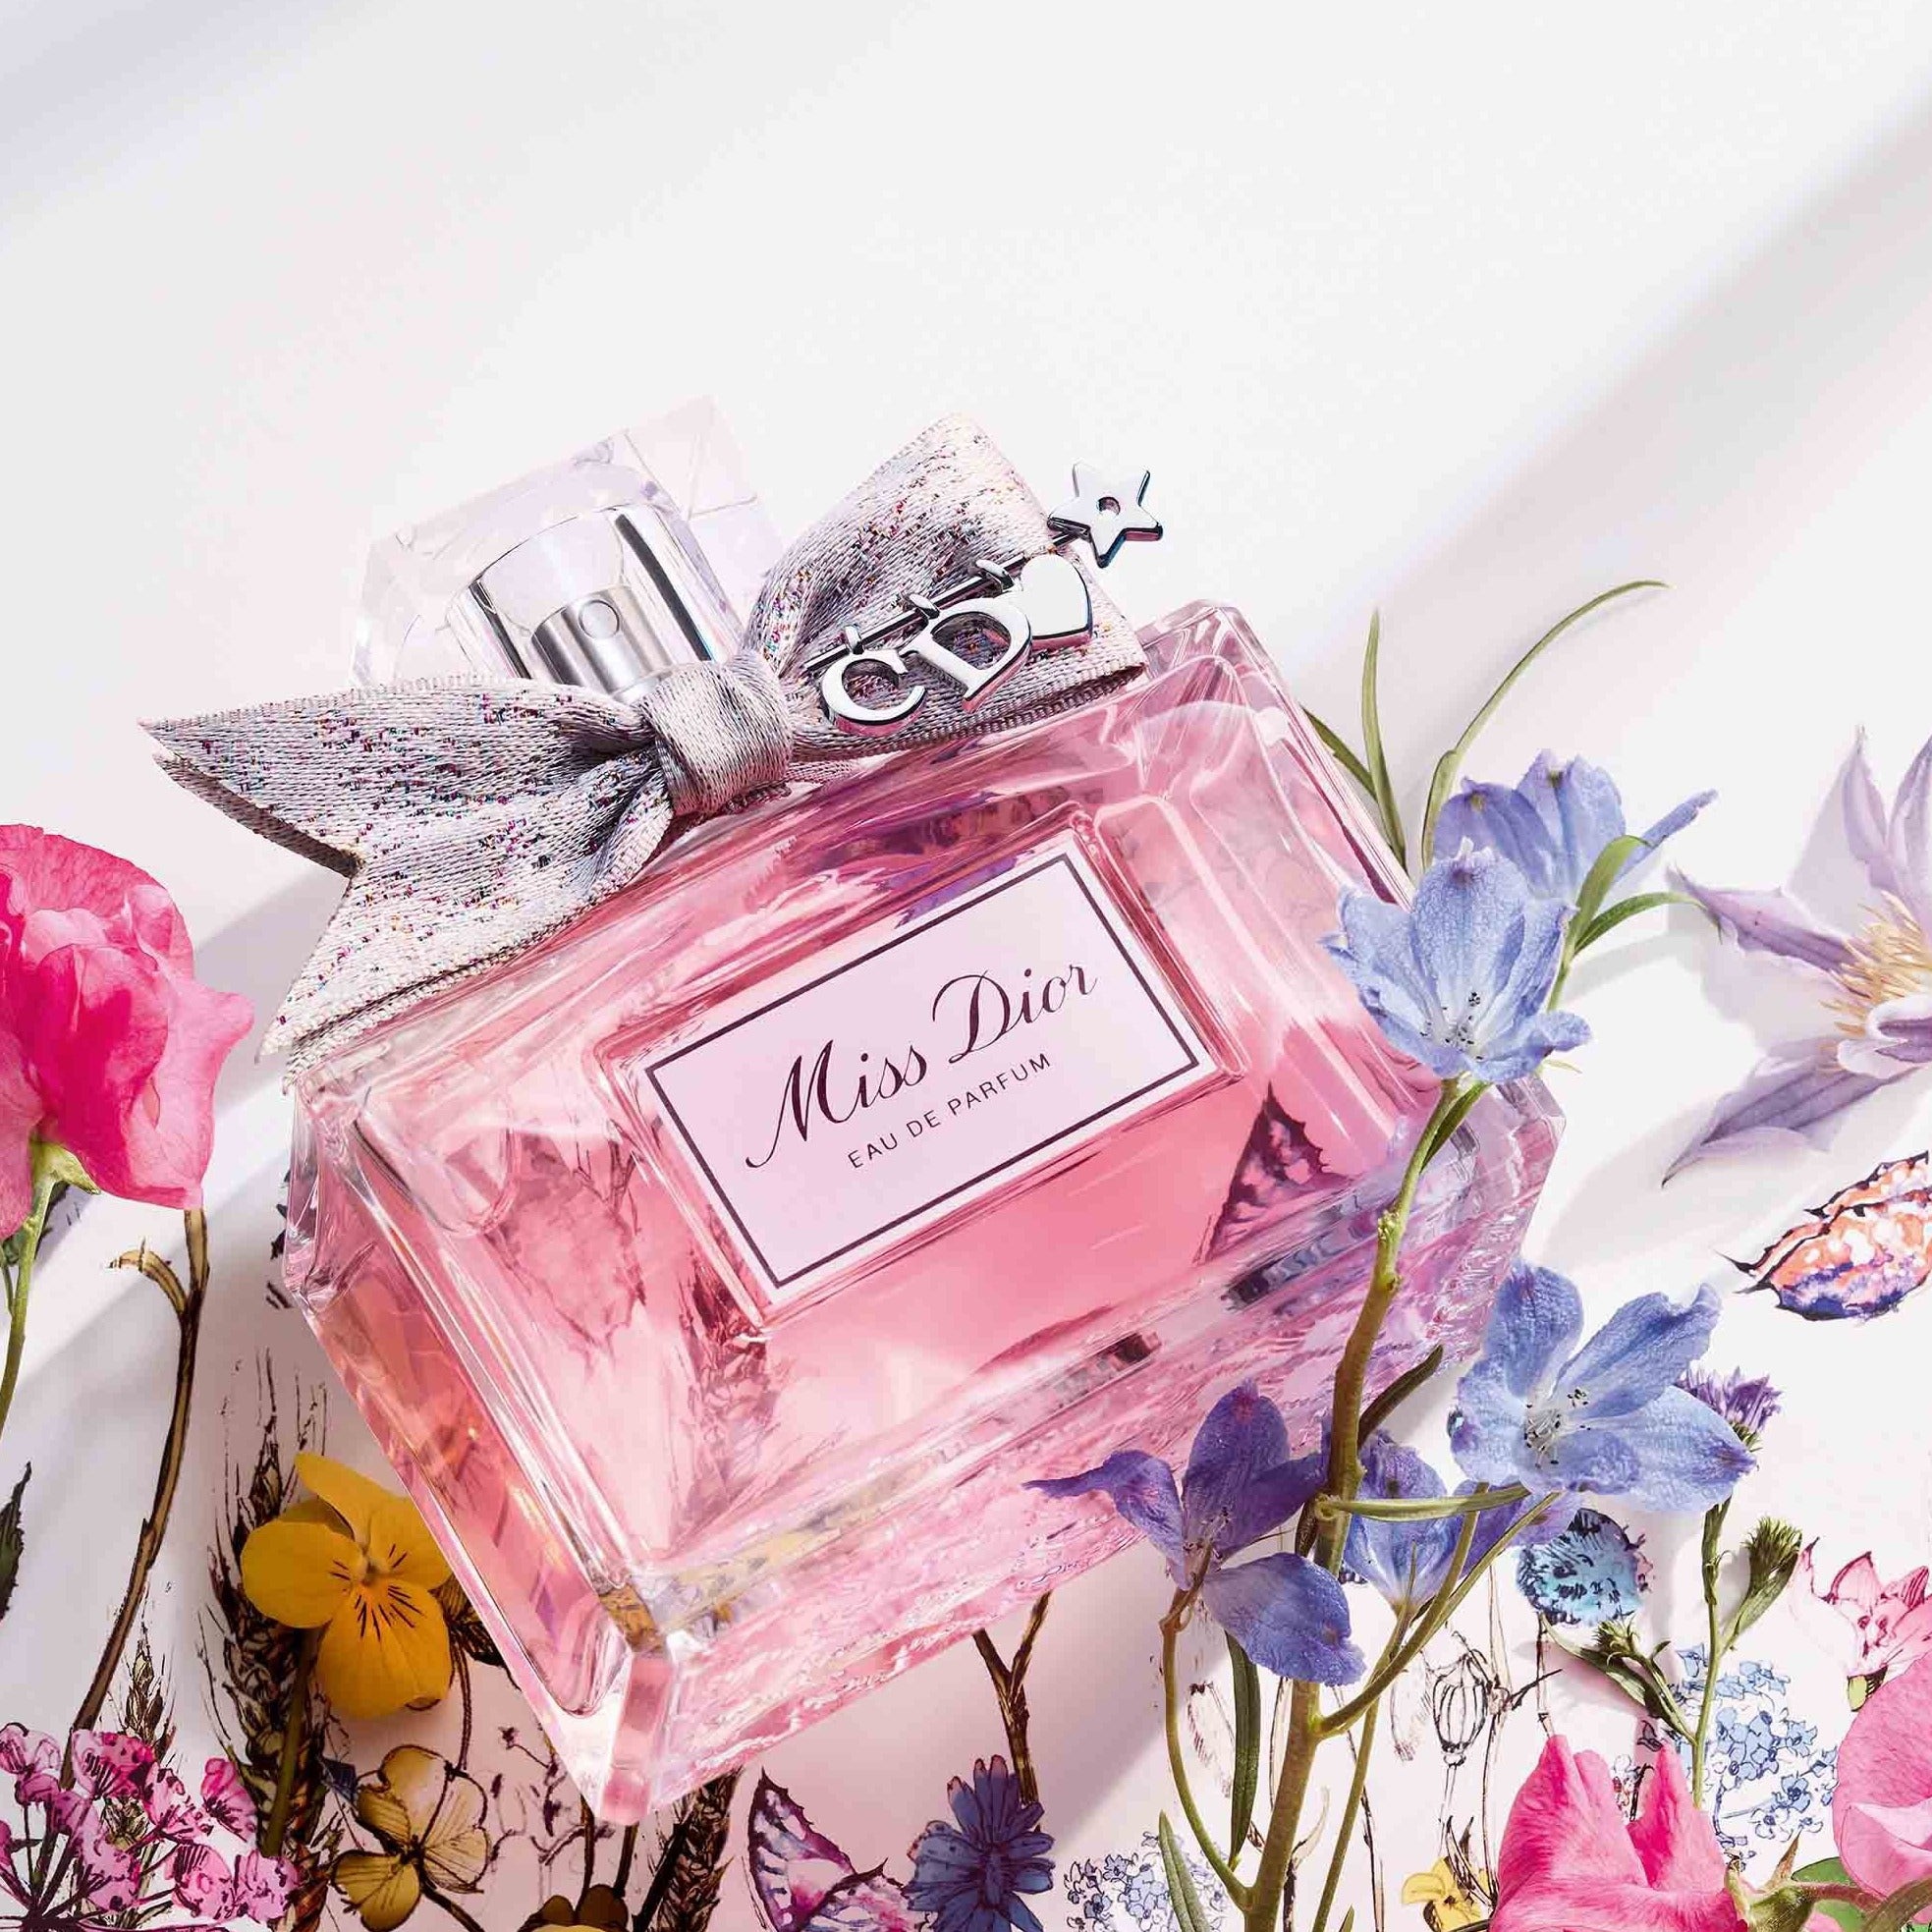 The Dior Art of Gifting: the tradition and savoir-faire of the